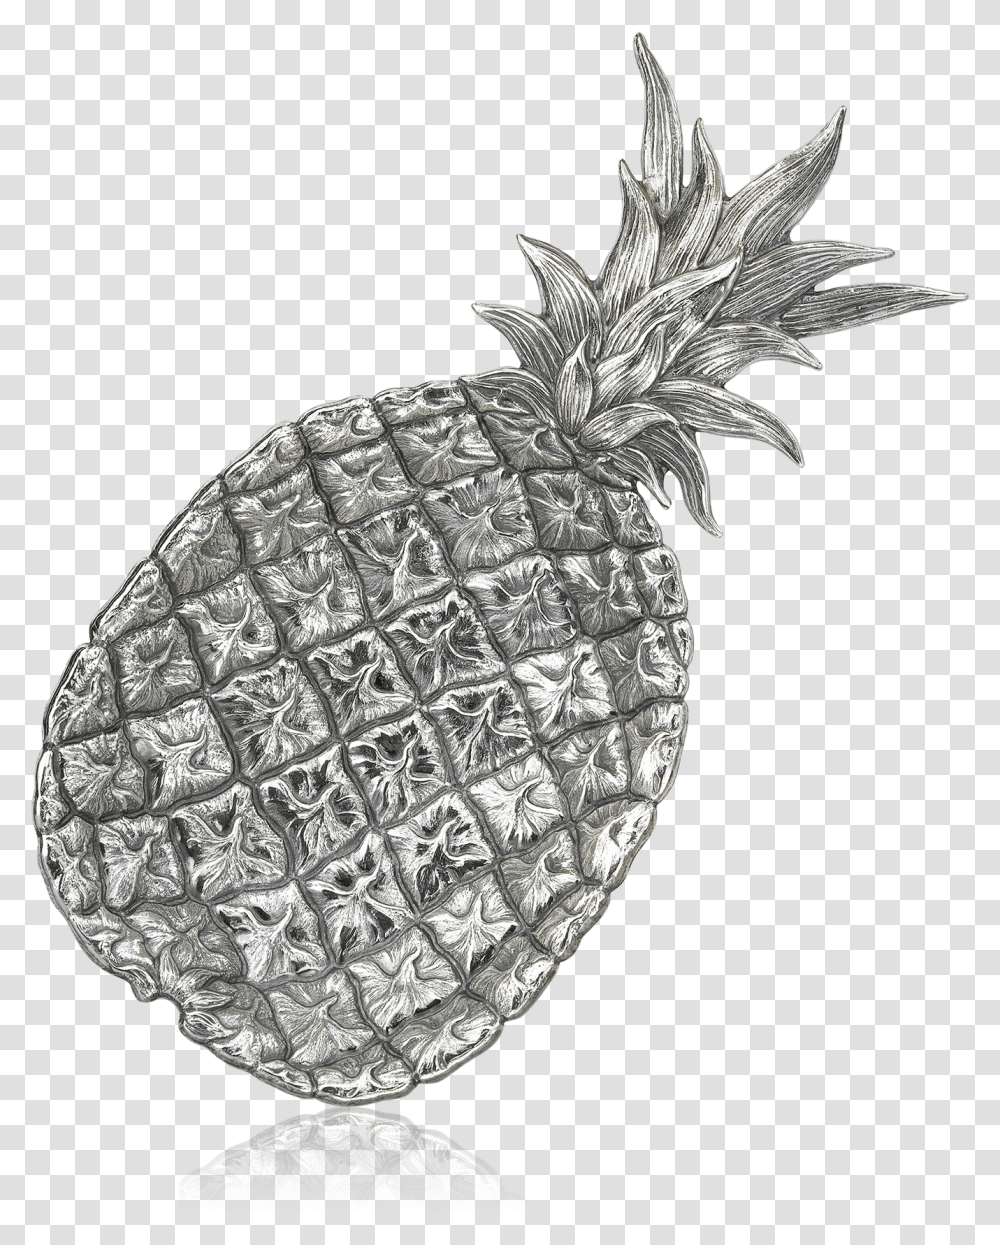 Buccellati Bowls Pineapple Silver Pineapple, Animal, Sea, Outdoors, Water Transparent Png